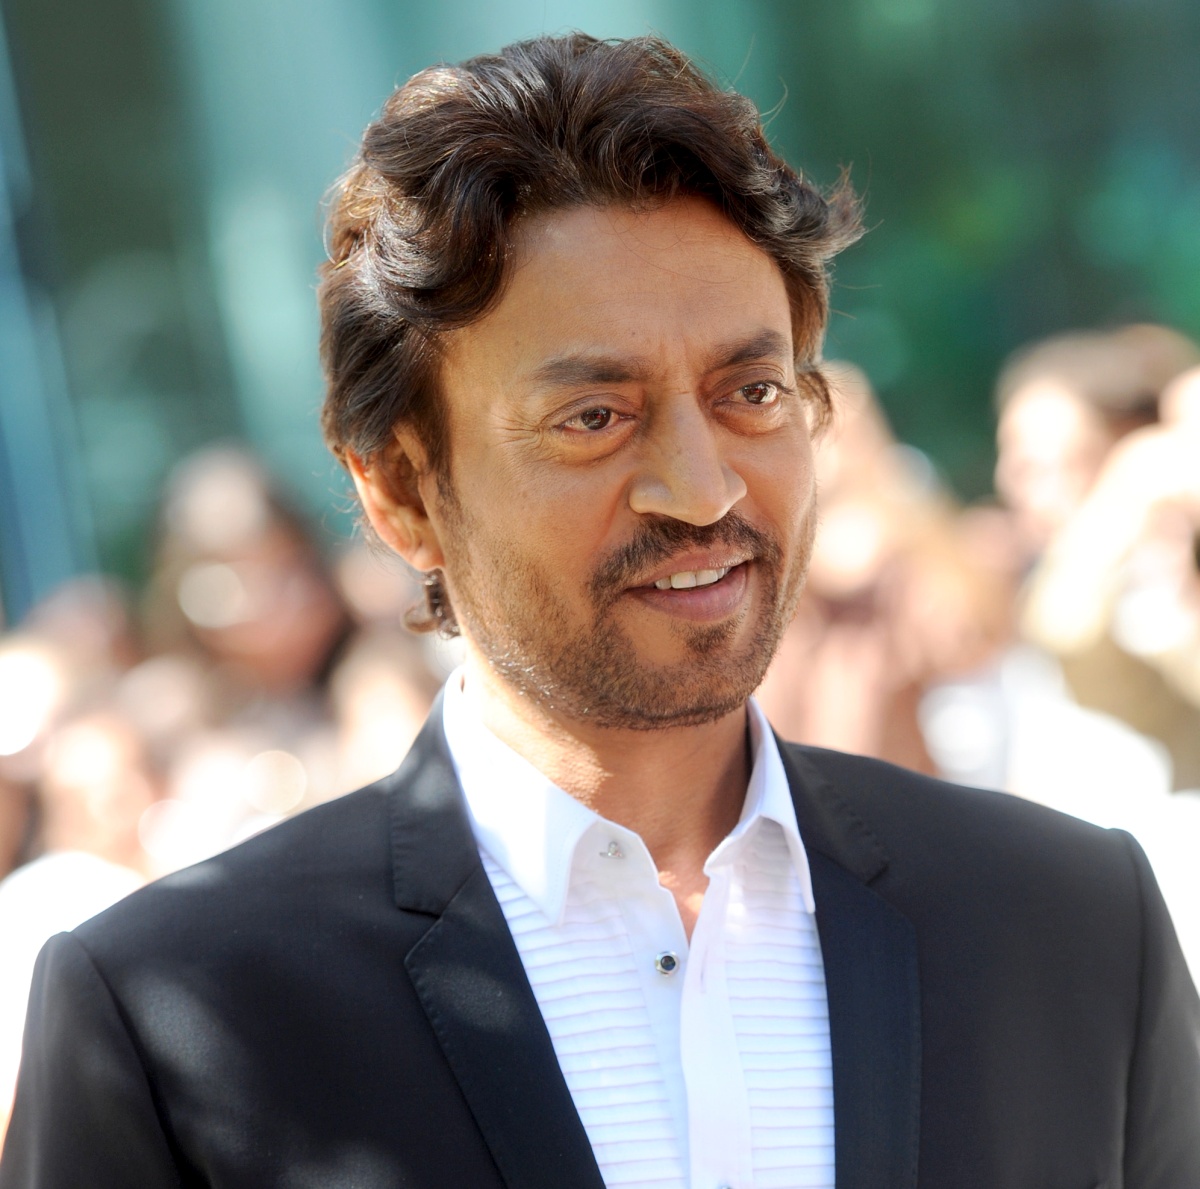 A National Award named after Irrfan?